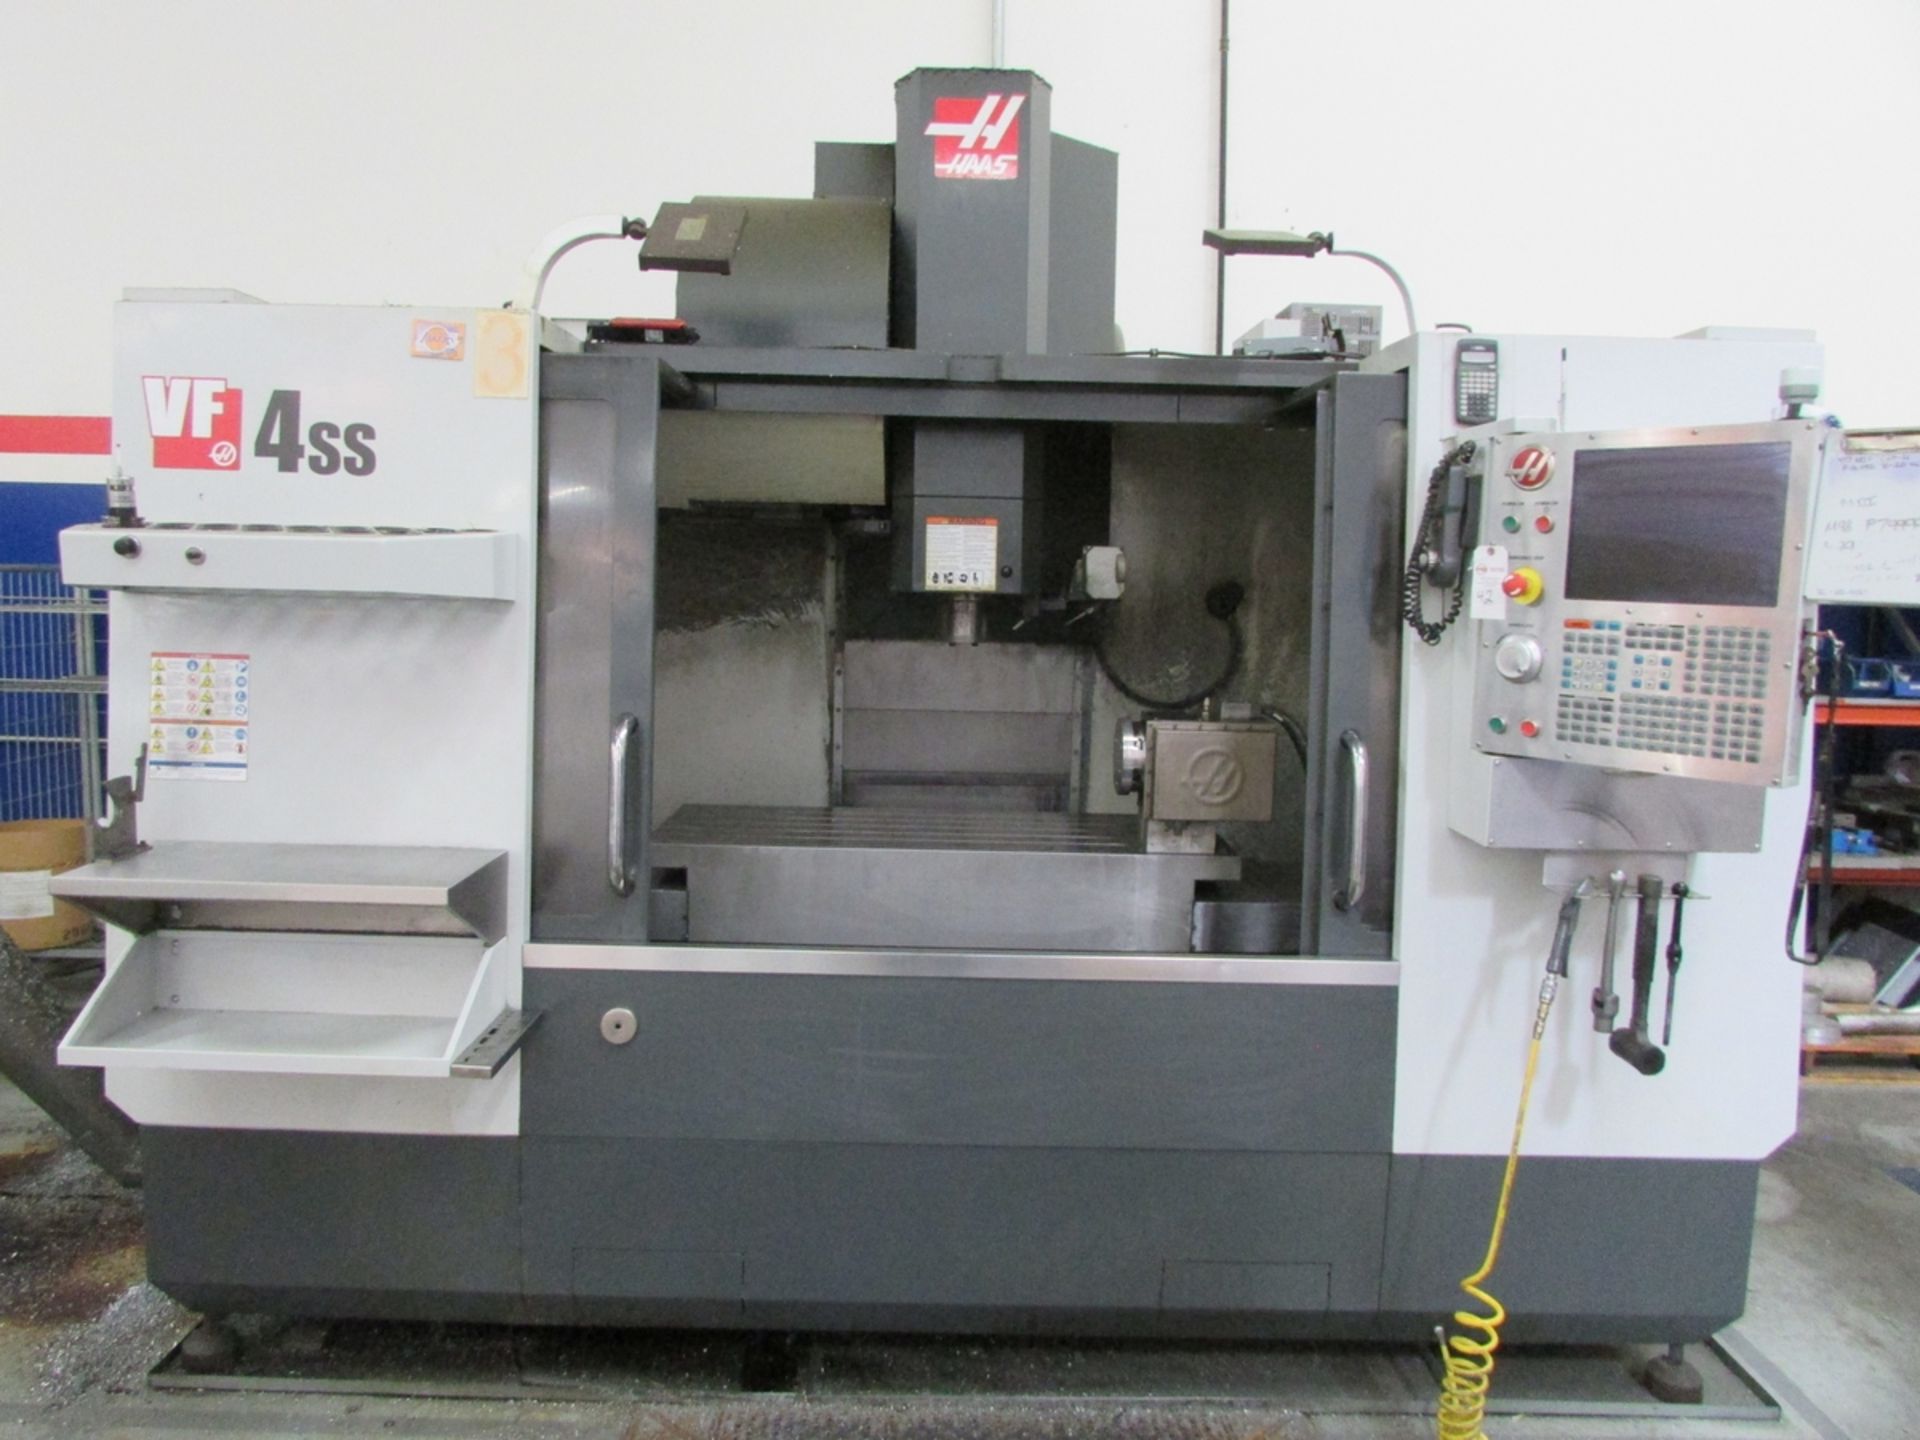 Haas VF4SS Vertical CNC Machining Center (2012) - Image 5 of 51